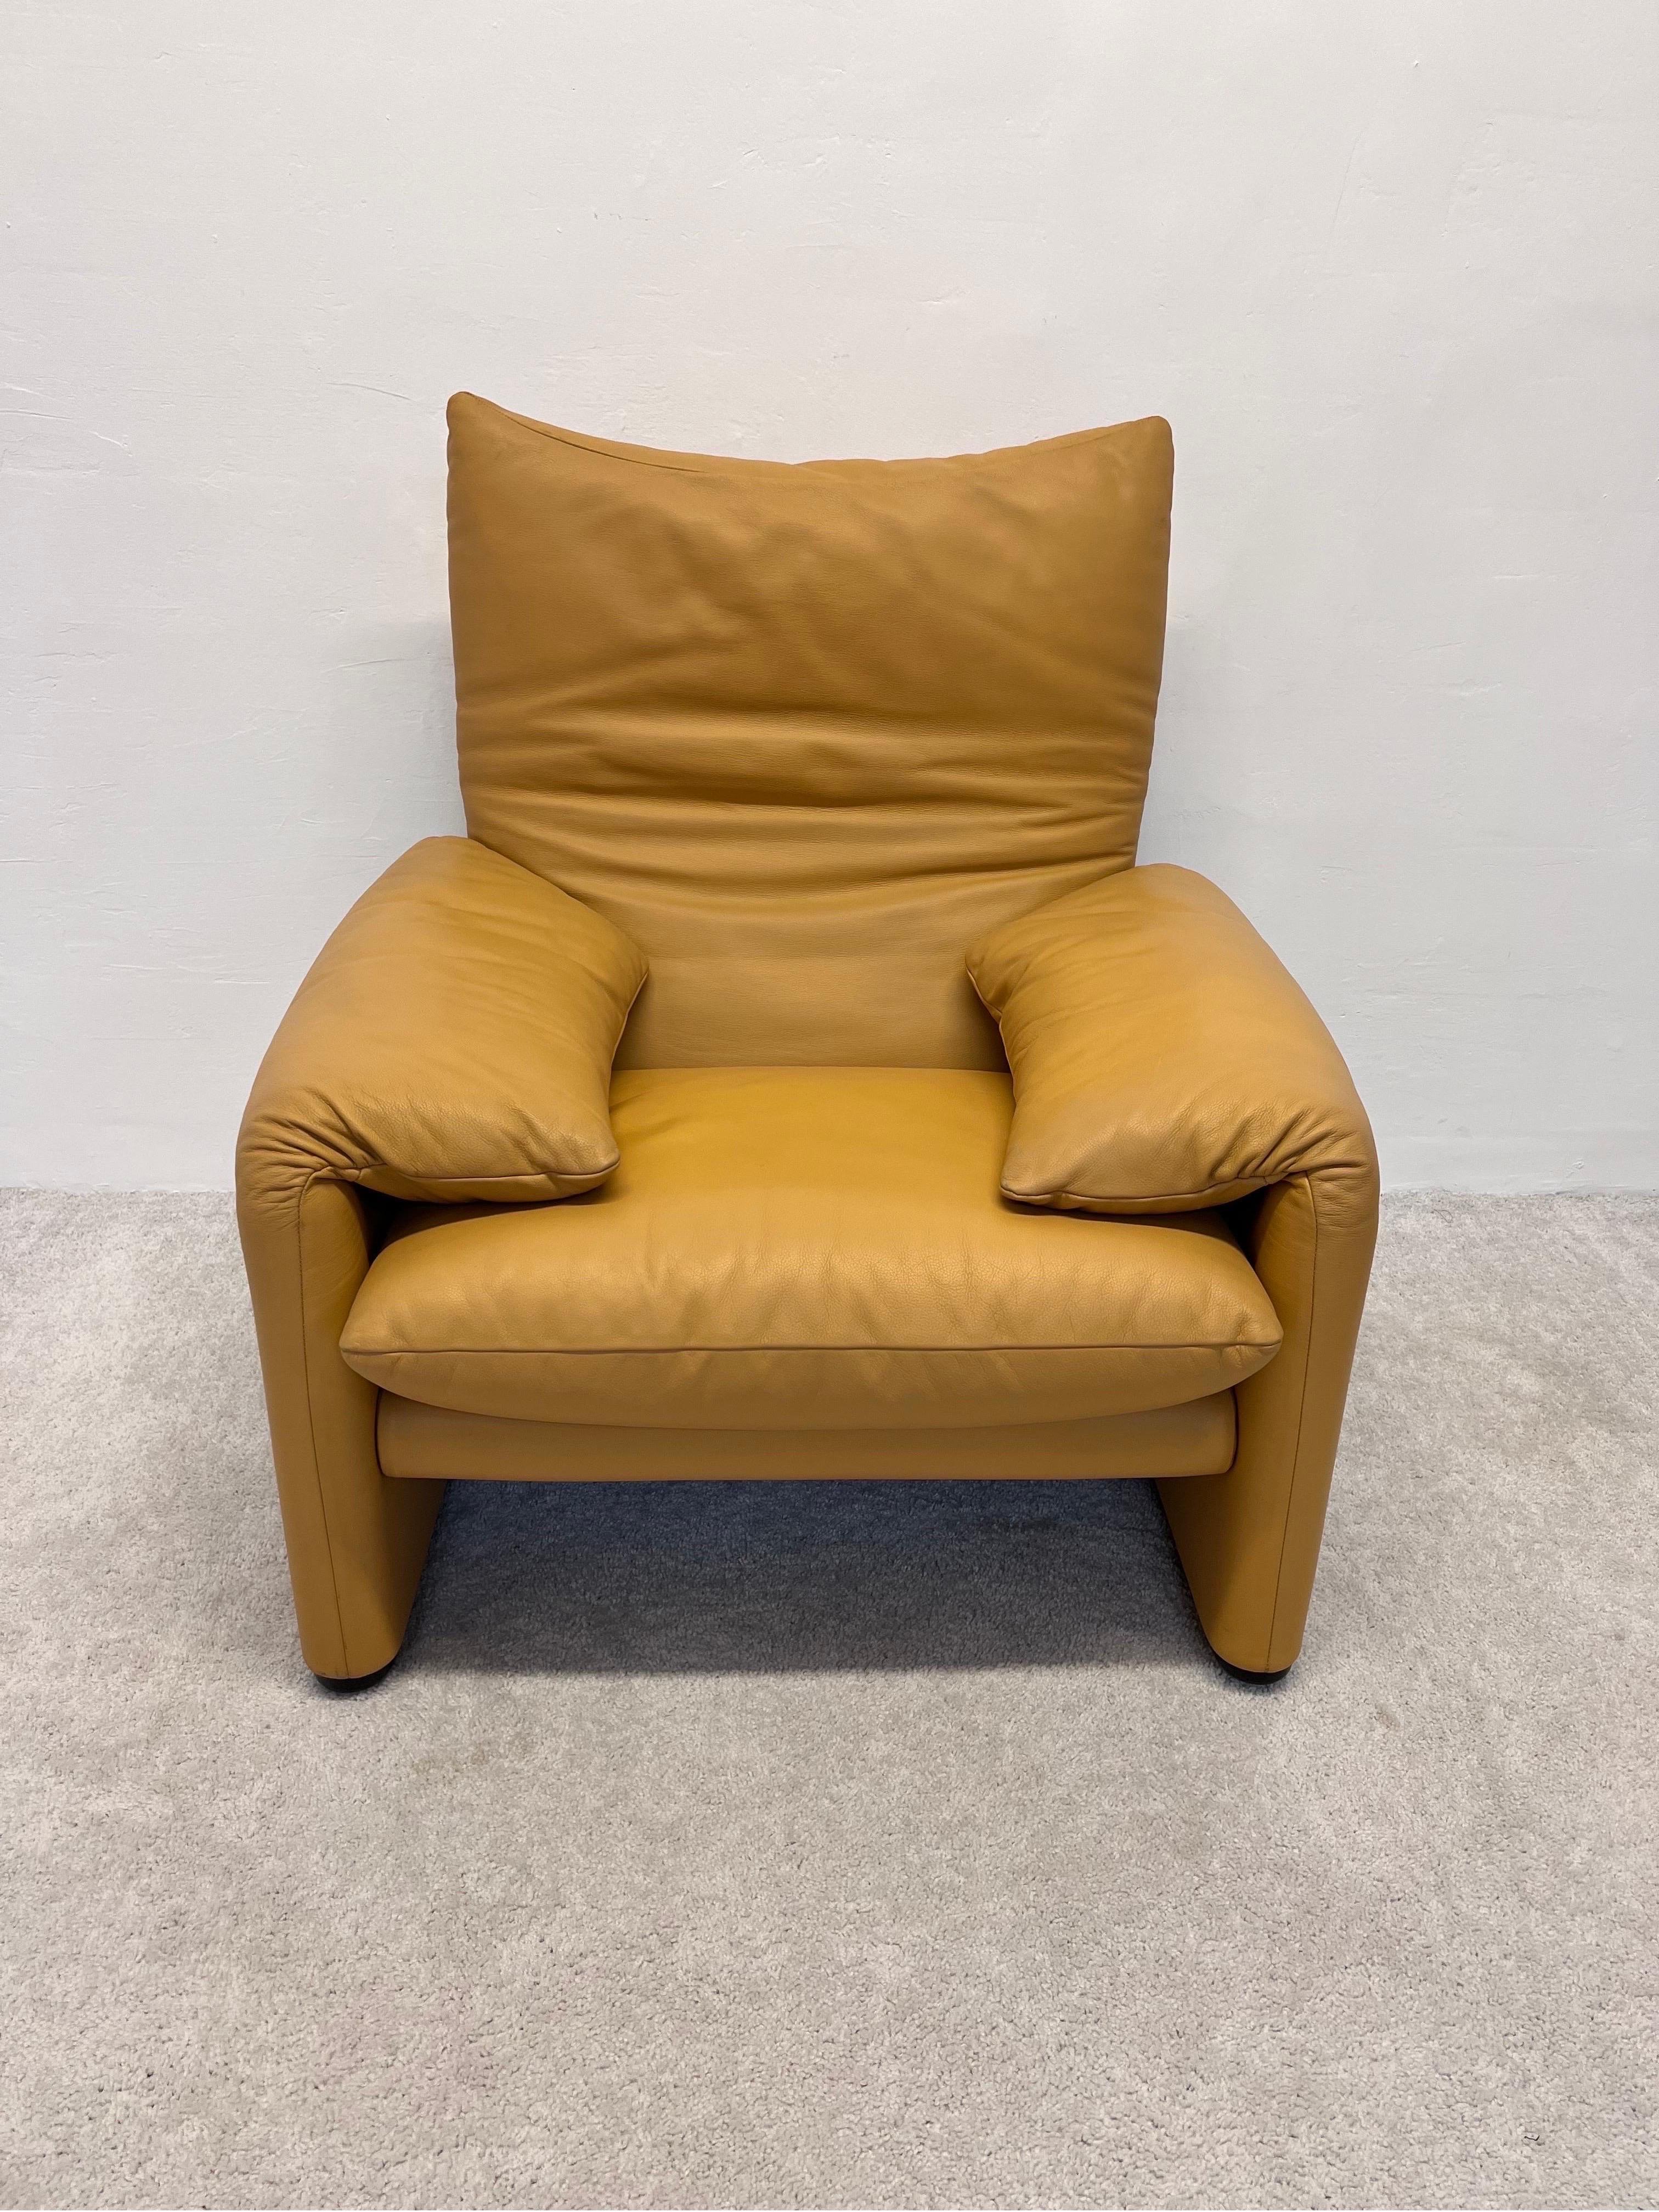 Post-Modern Vico Magistretti Maralunga Leather Lounge Chair for Cassina, 1980s